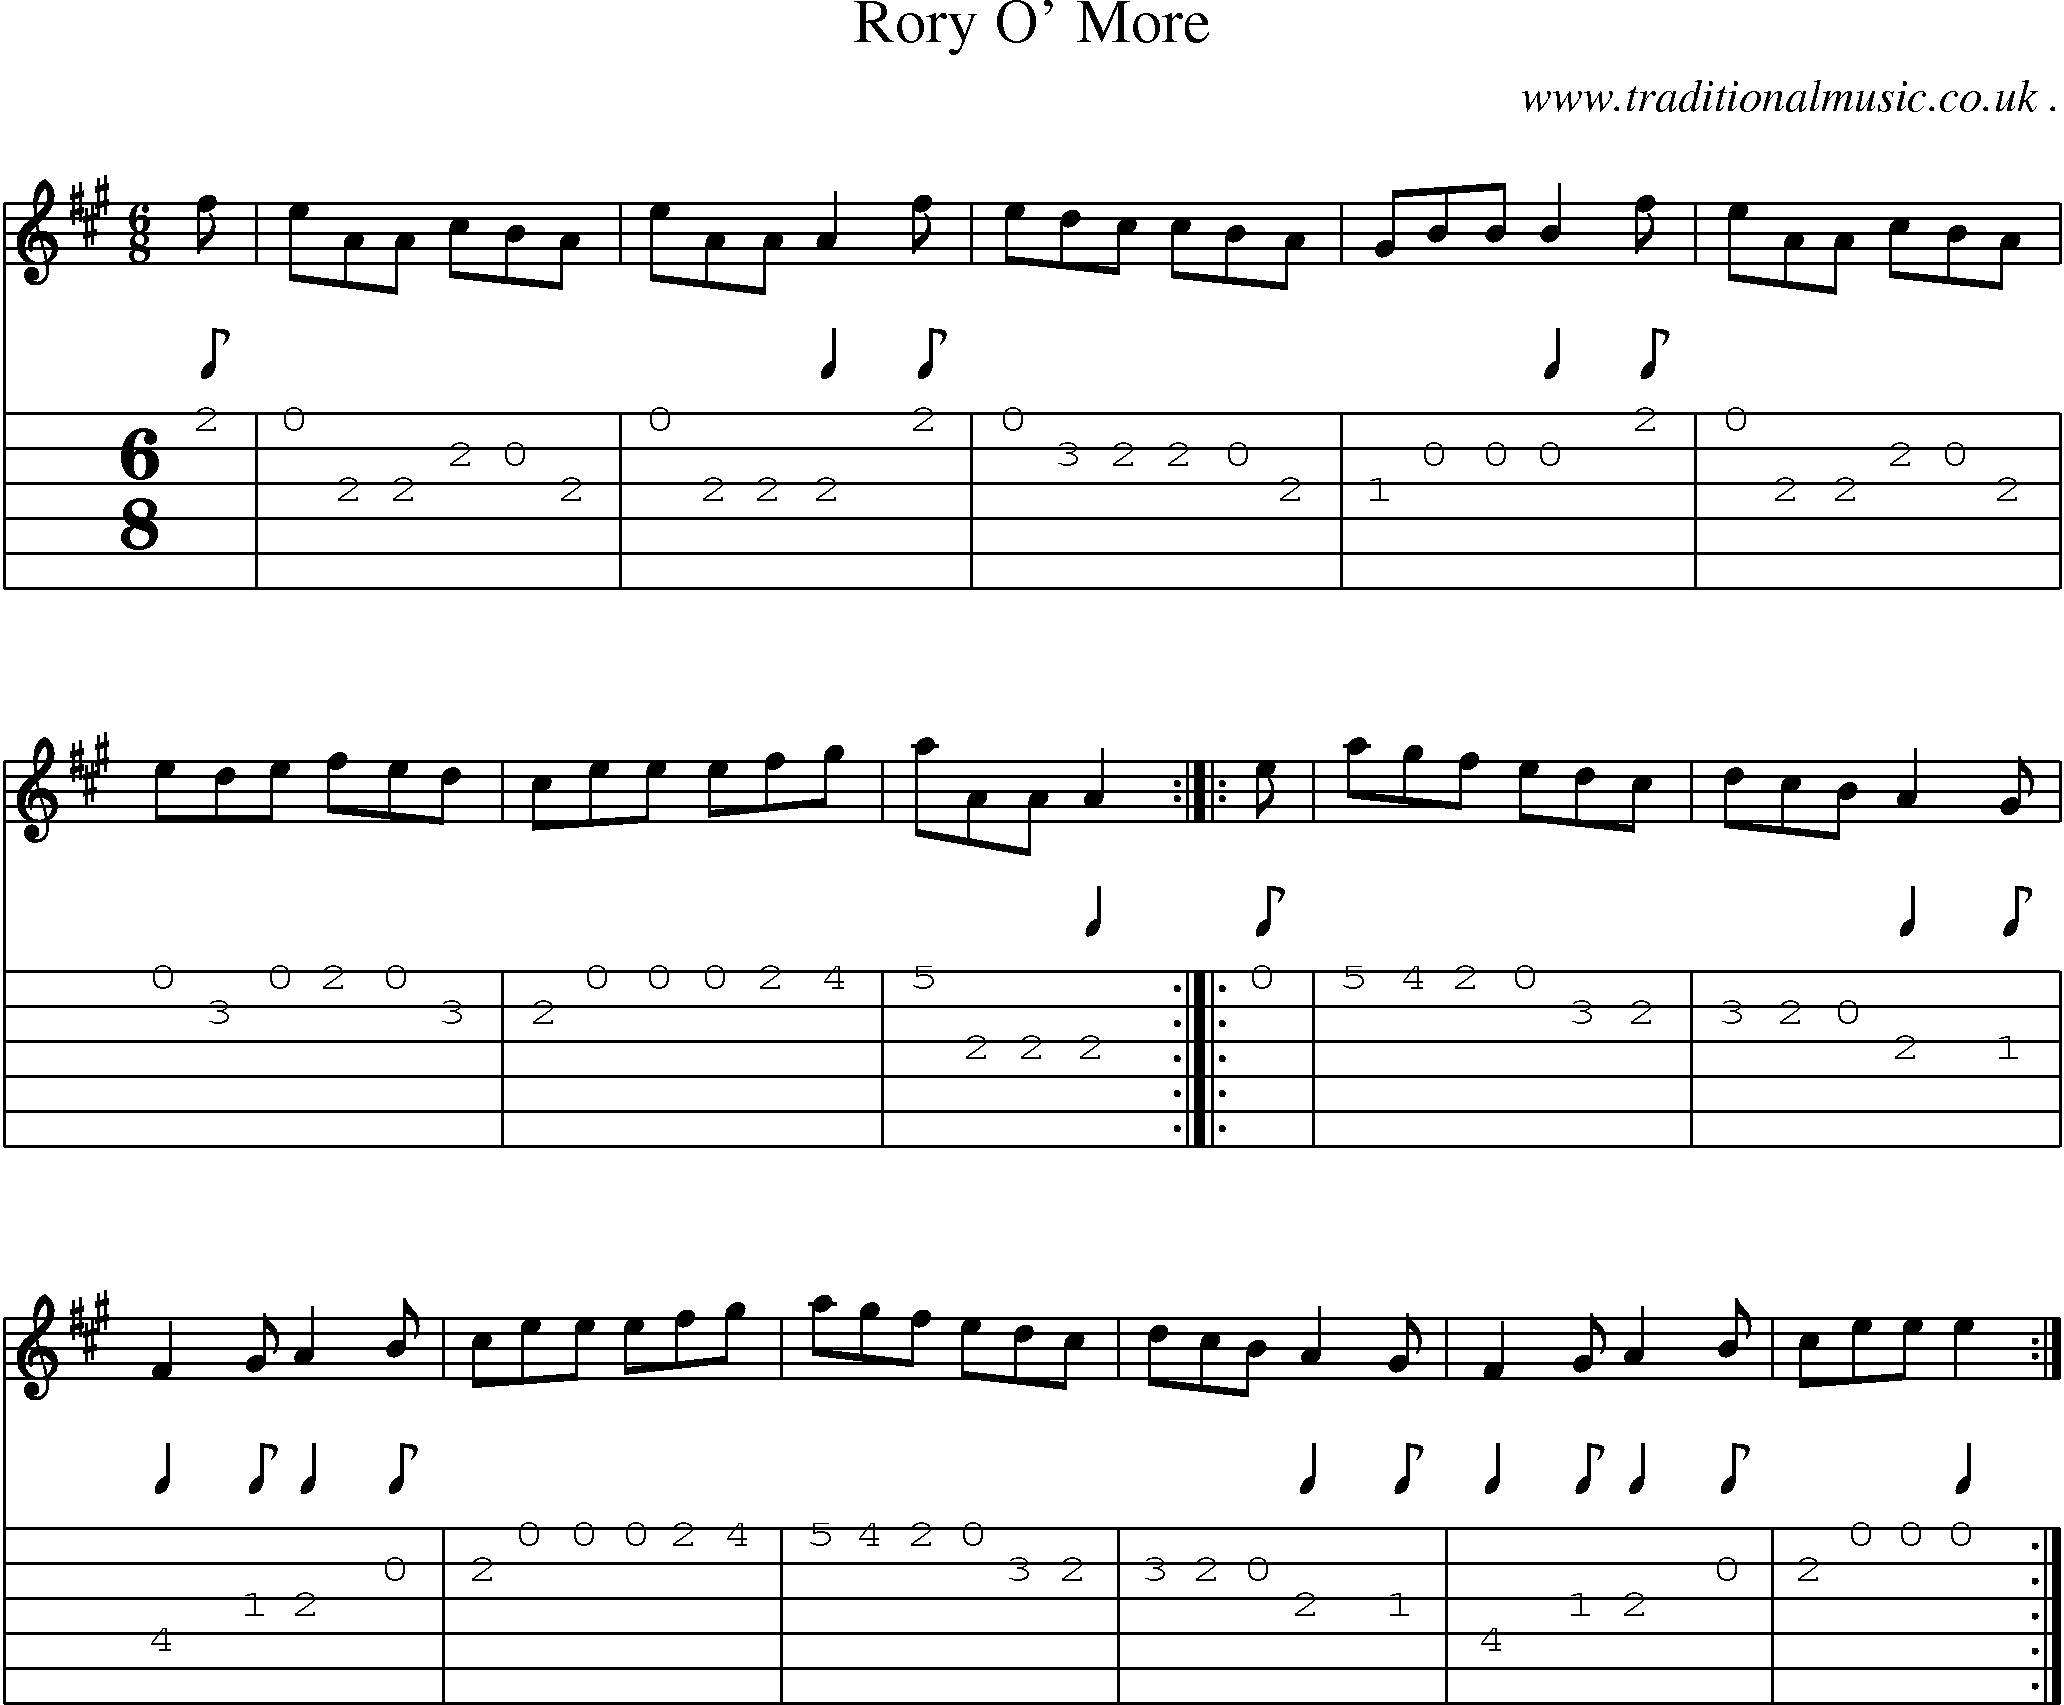 Sheet-music  score, Chords and Guitar Tabs for Rory O More